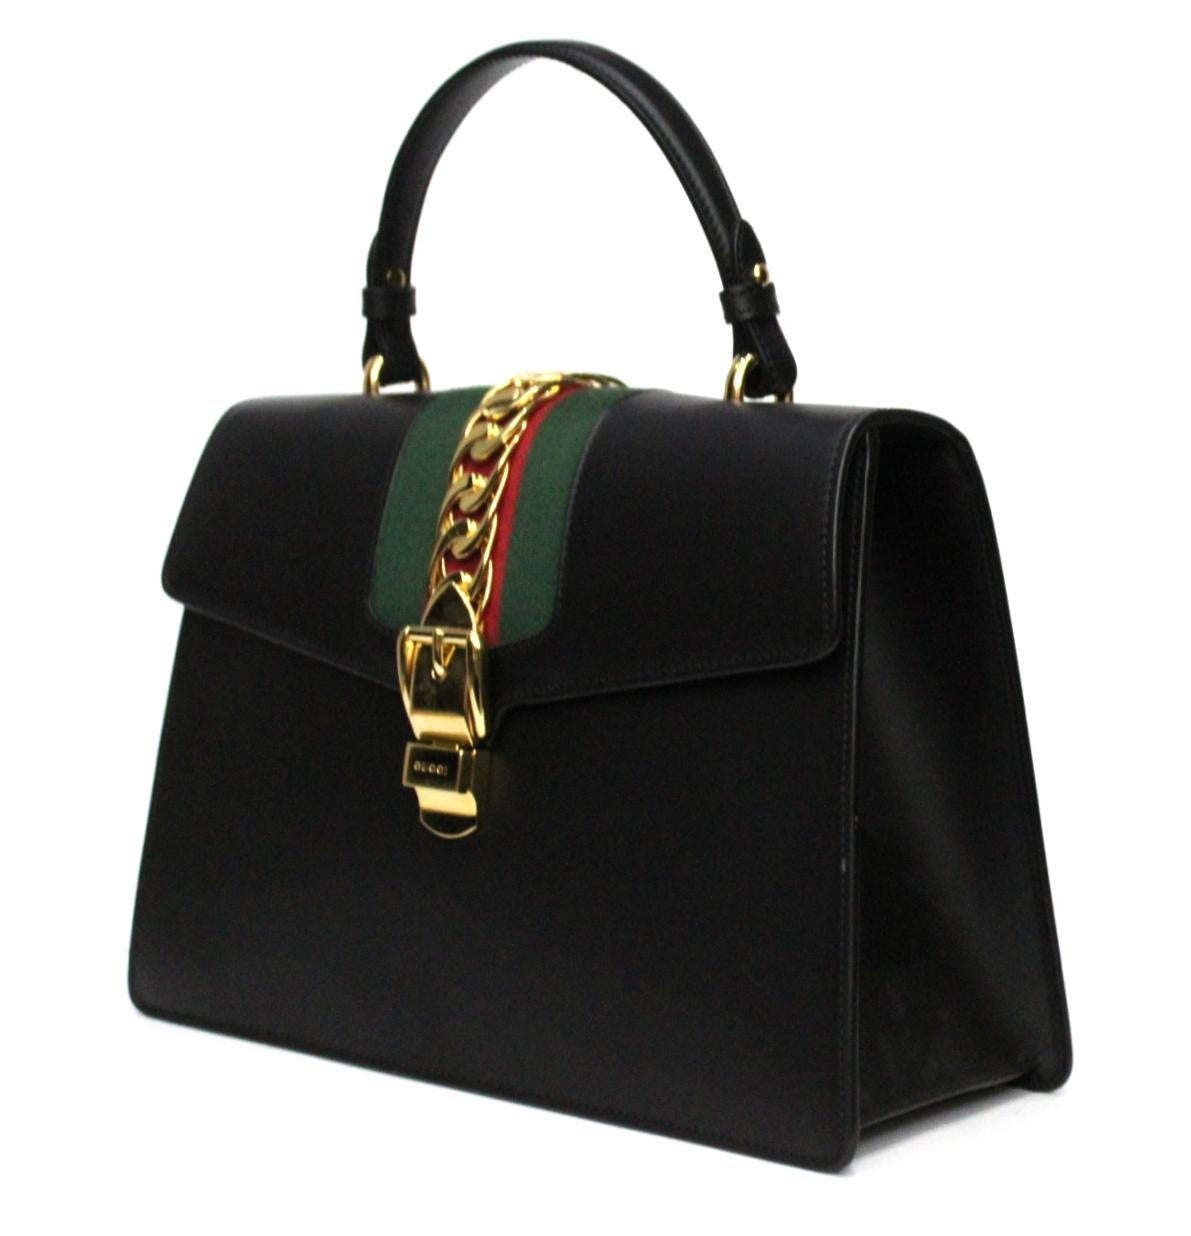 Sylvie bag from the last collection of Gucci . This is a beautiful top handle bag in smooth leather with nylon Web embedded and a gold chain .
Detachable shoulder strap with 42cm drop.
Microfiber lining with a suede-like finis